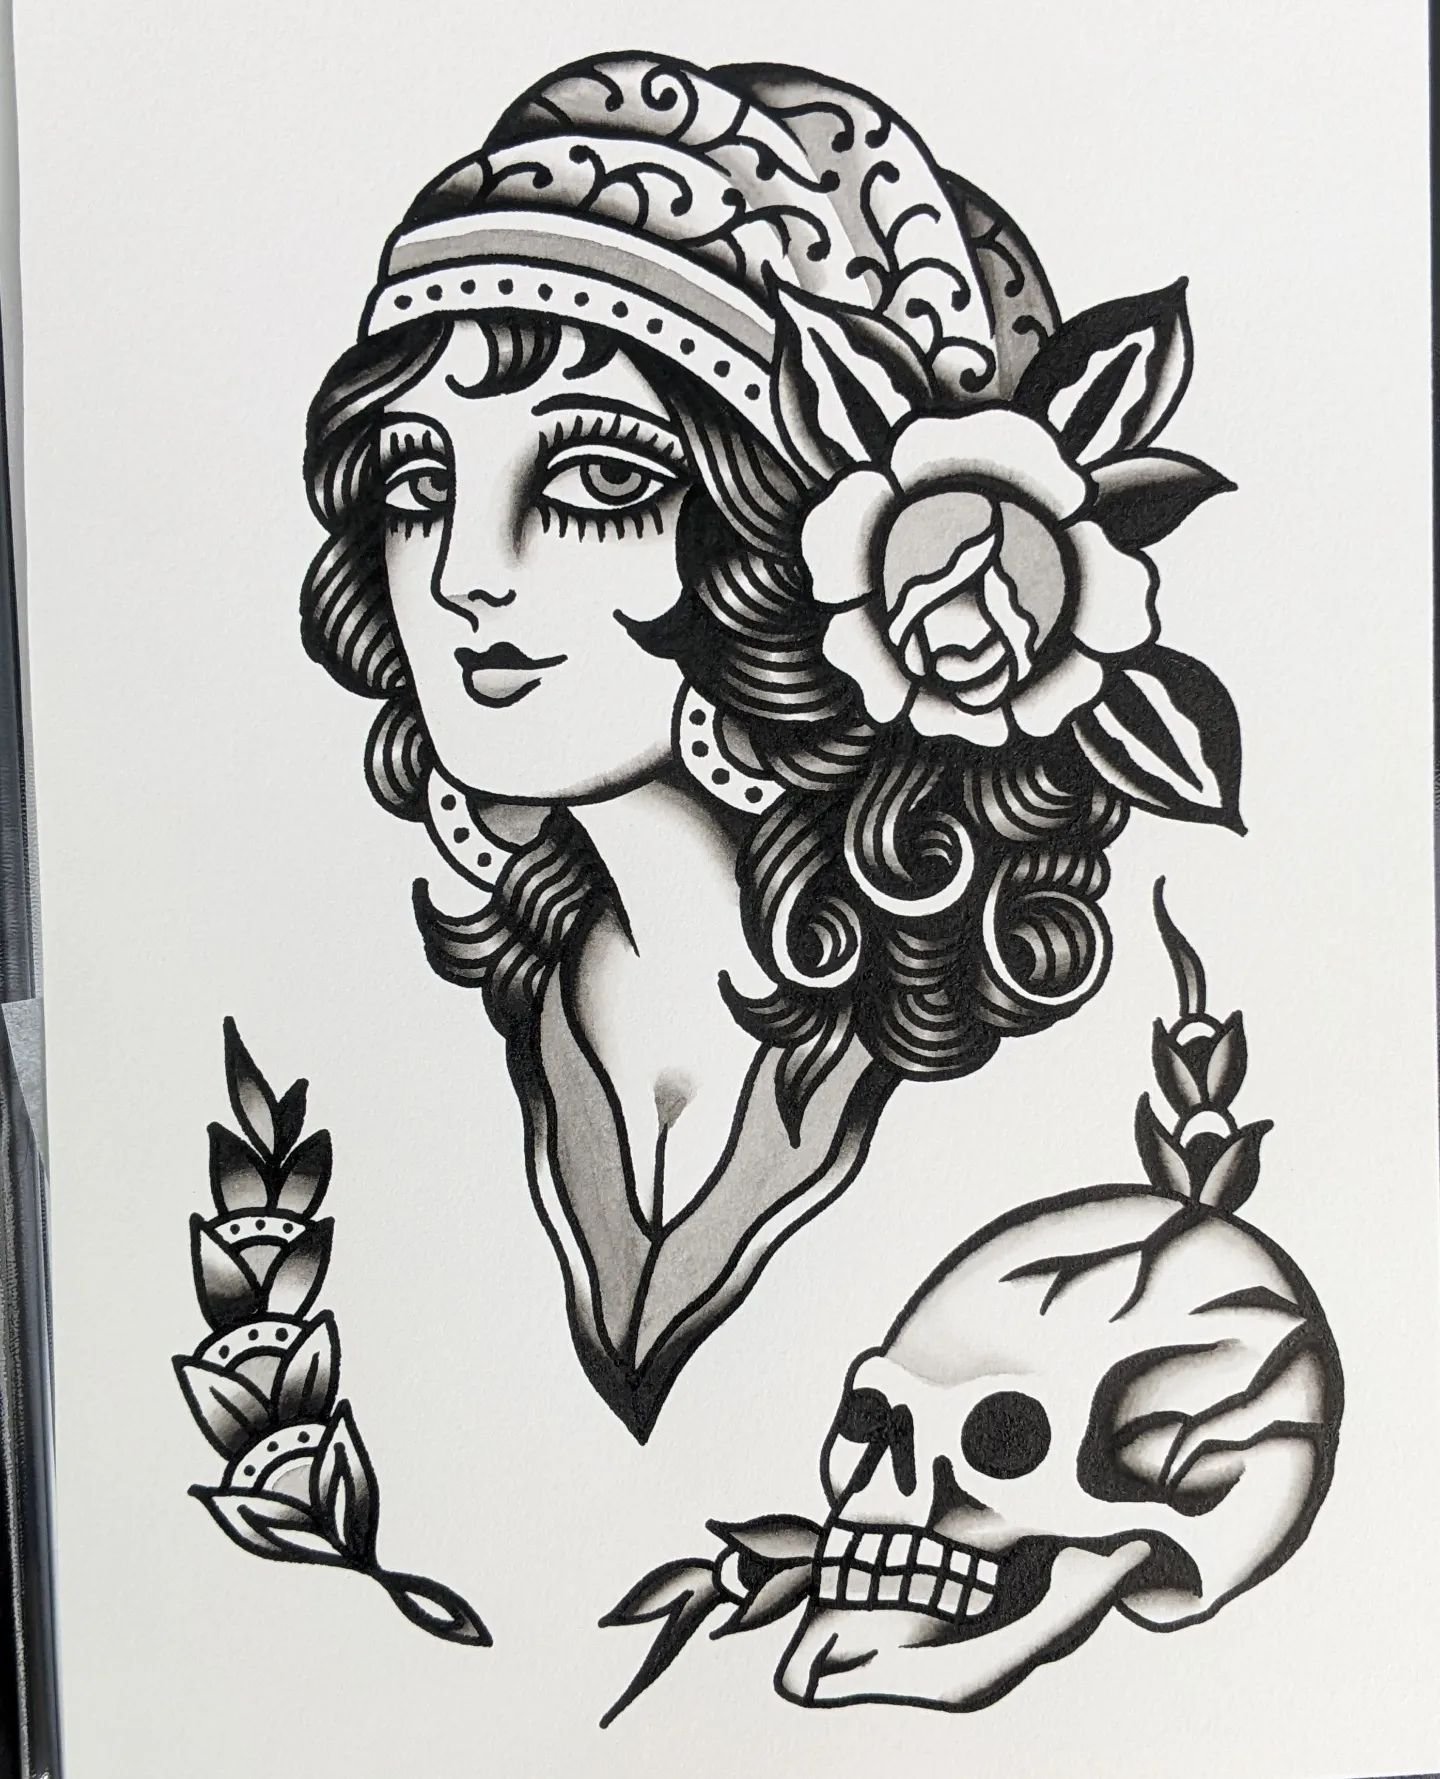 I've been repainting some Paul Dobleman designs from his &quot;My Traditional Vision&quot; book.  If you're interested in getting one tattooed let me know.  Black and Grey or Color, I got more to look through at the shop as well.